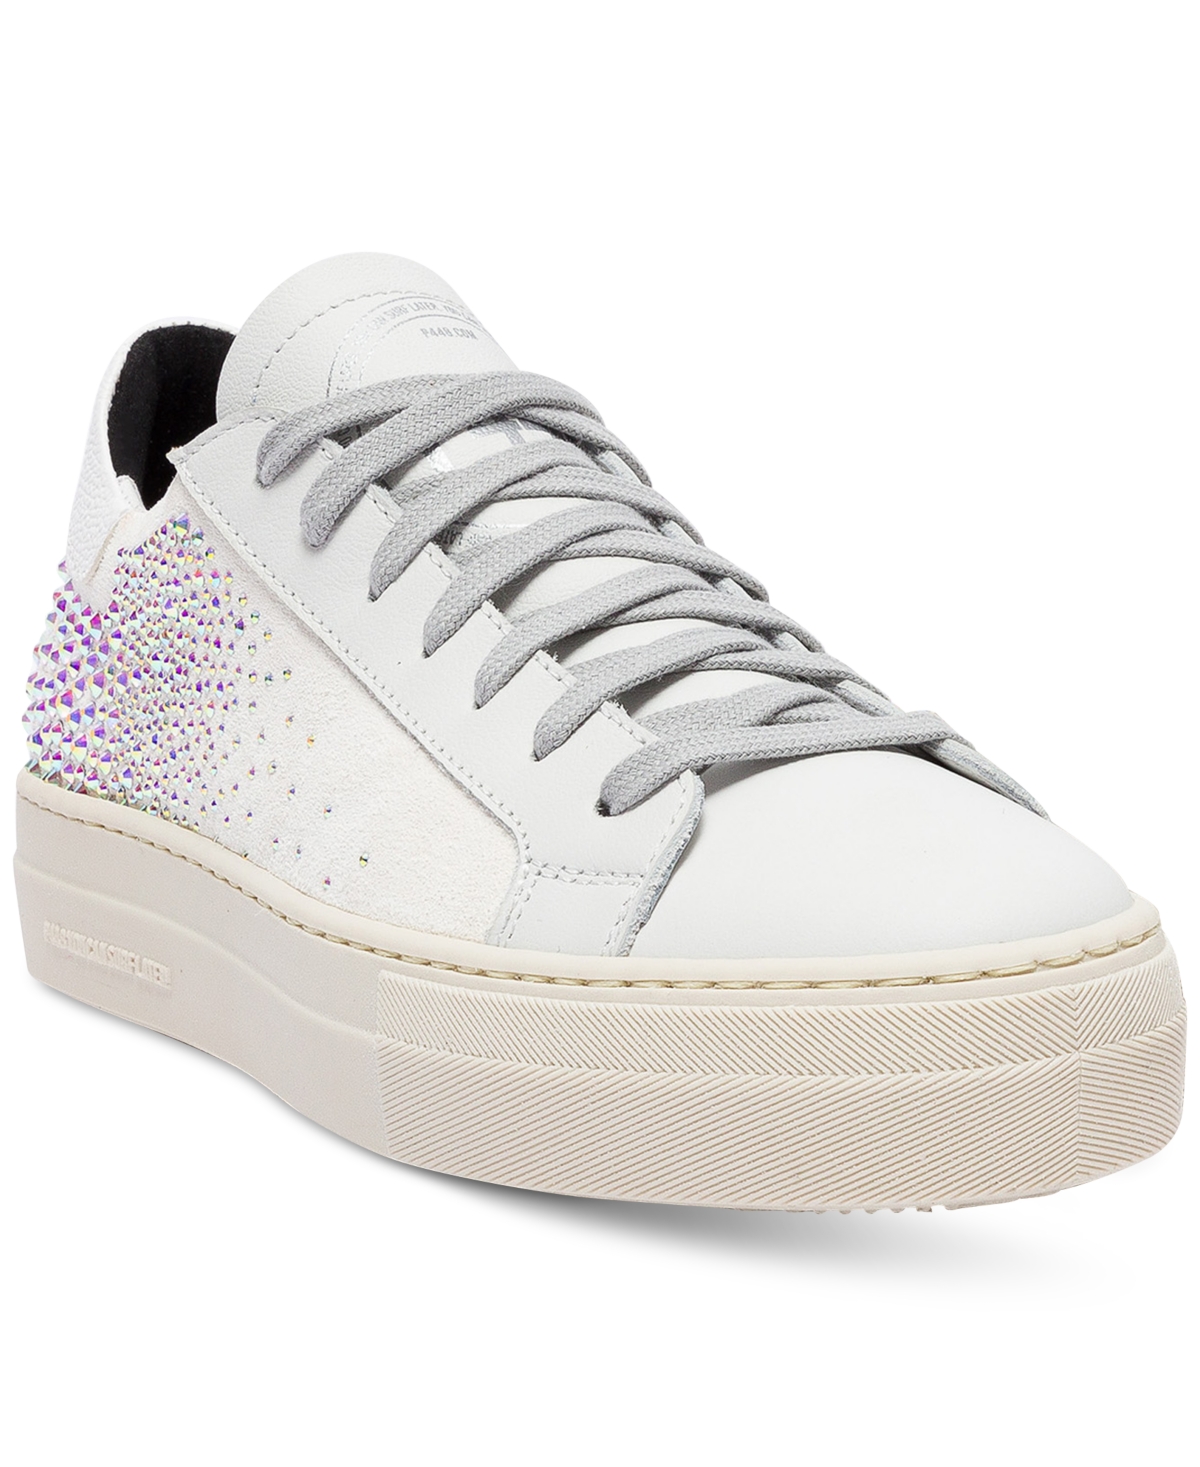 Women's Thea Embellished Lace-Up Low-Top Sneakers - Galu